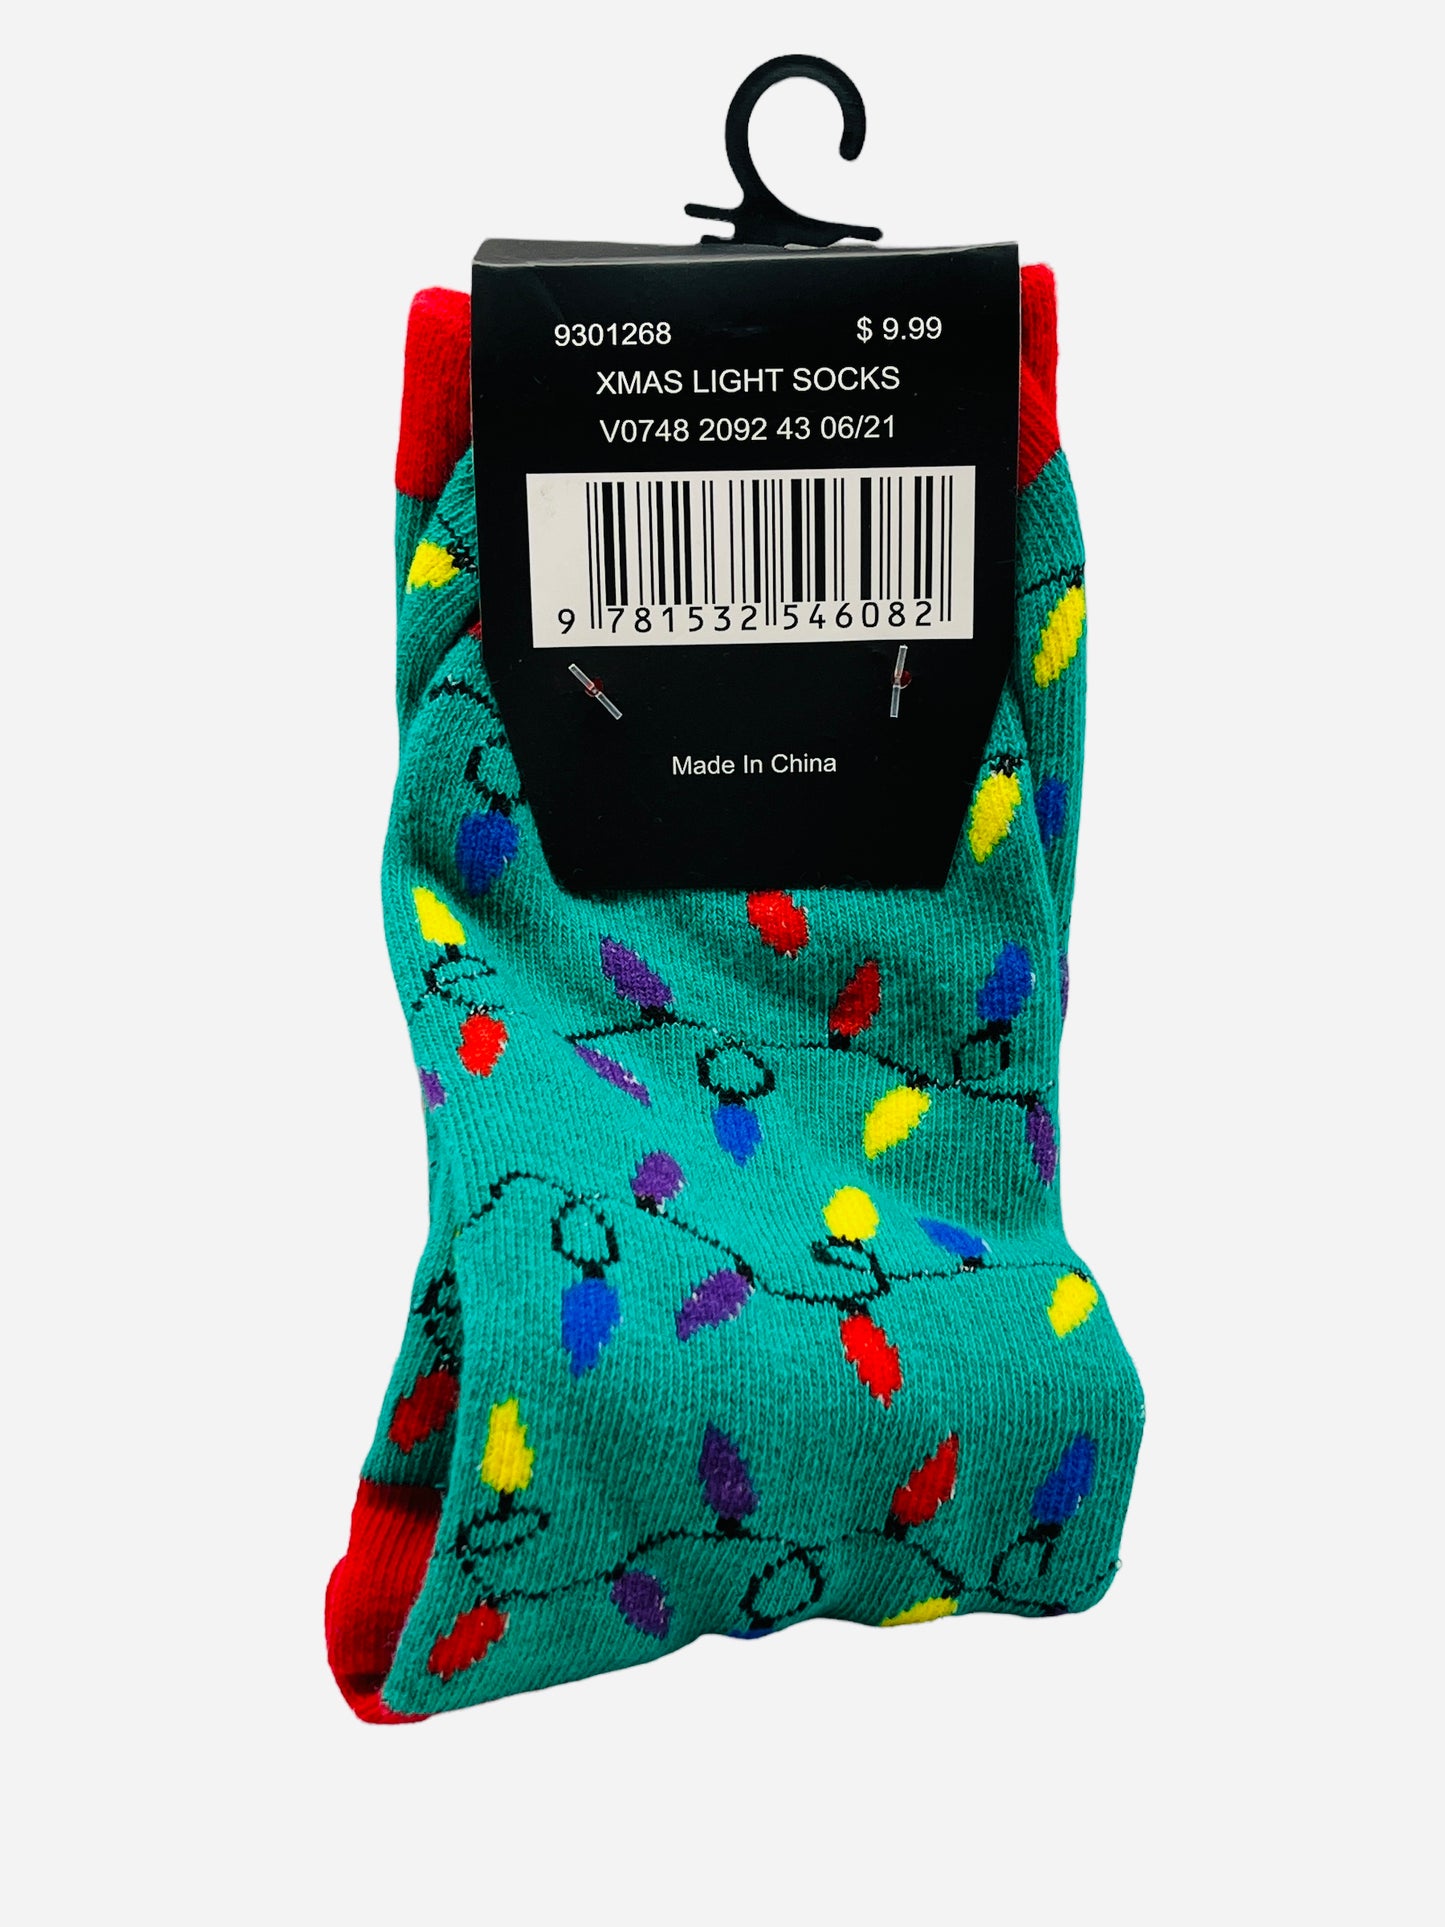 Christmas Lights Socks One Size Fits Most